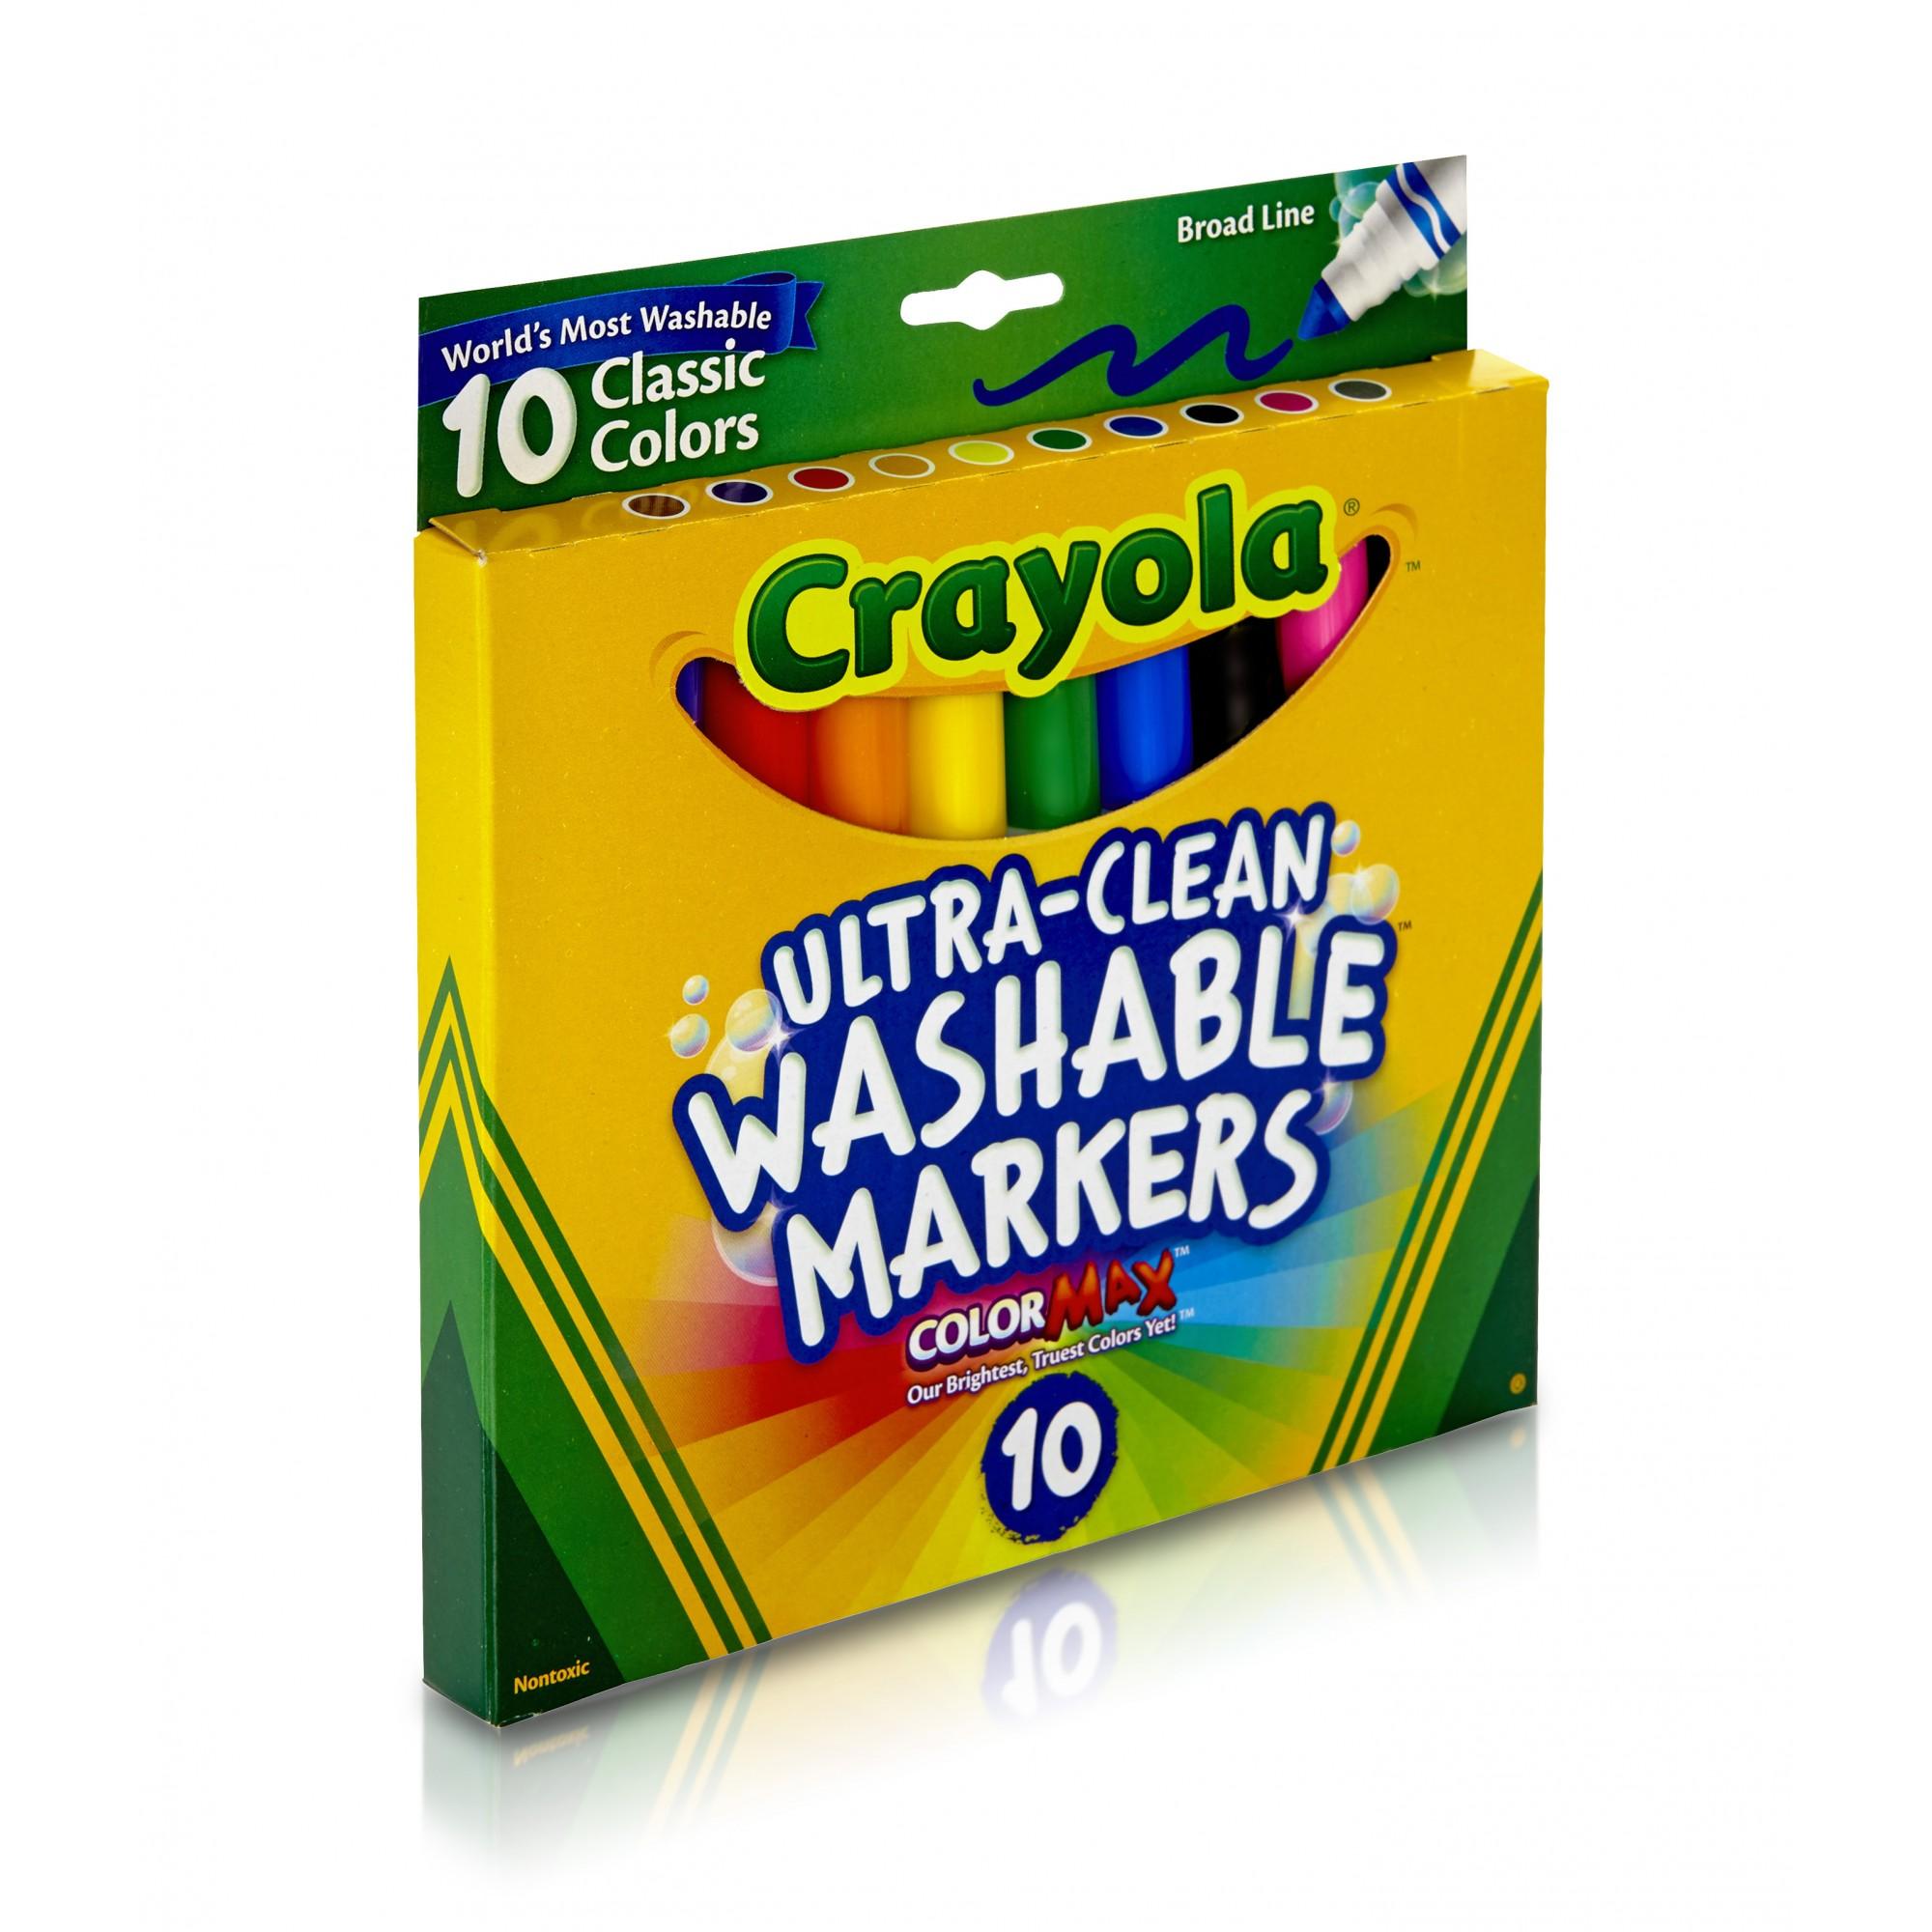 Crayola Ultra-Clean Washable Broad Line Markers, School & Art Supplies, 10 Ct - image 2 of 9